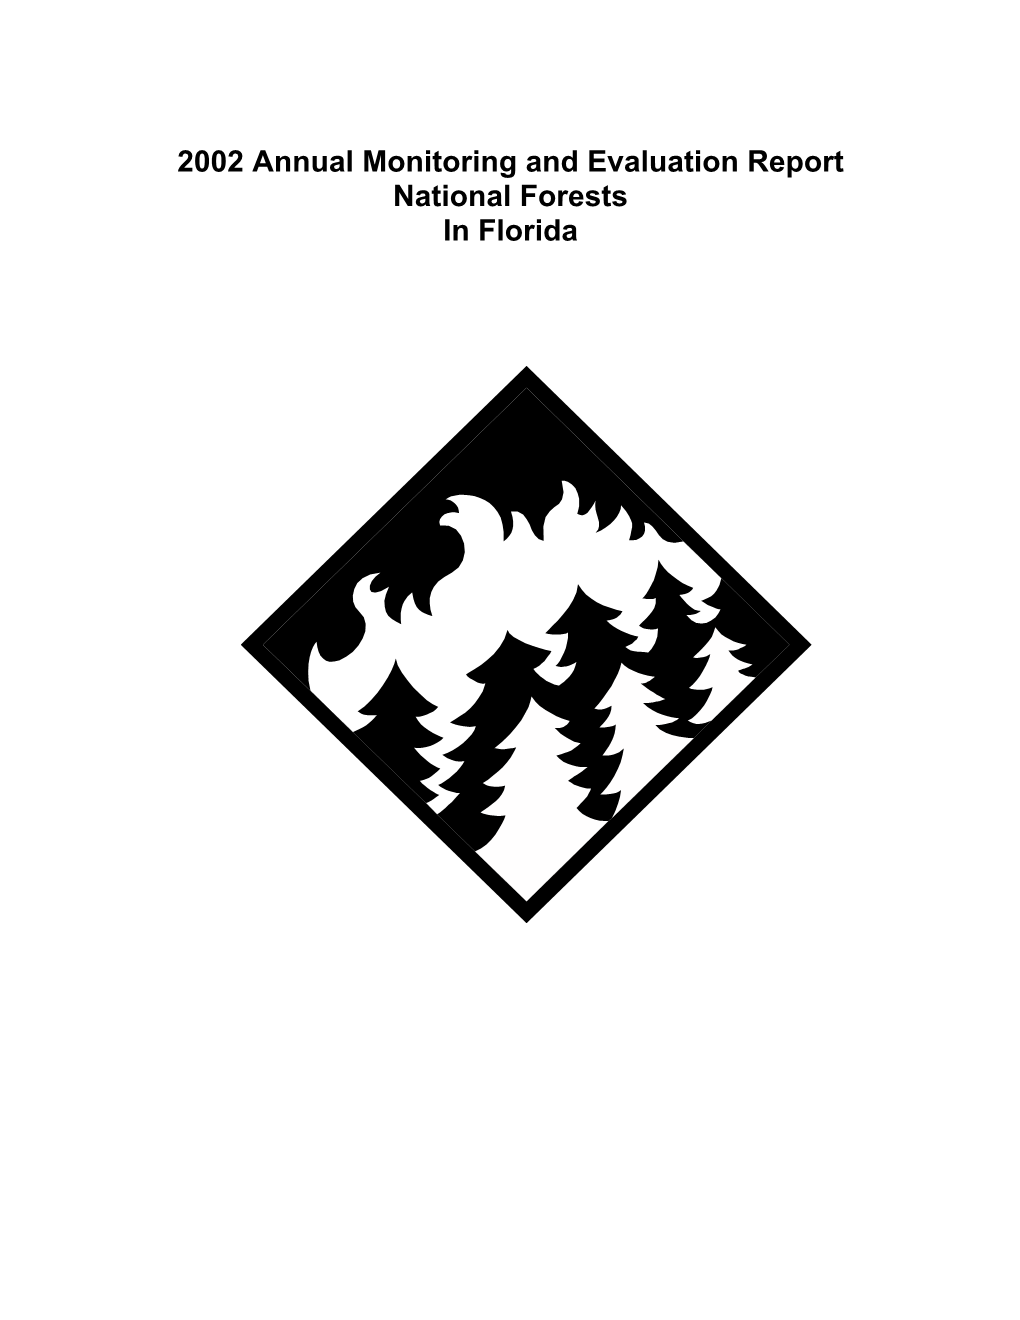 2002 Annual Monitoring and Evaluation Report (Pdf 2.64Mb)